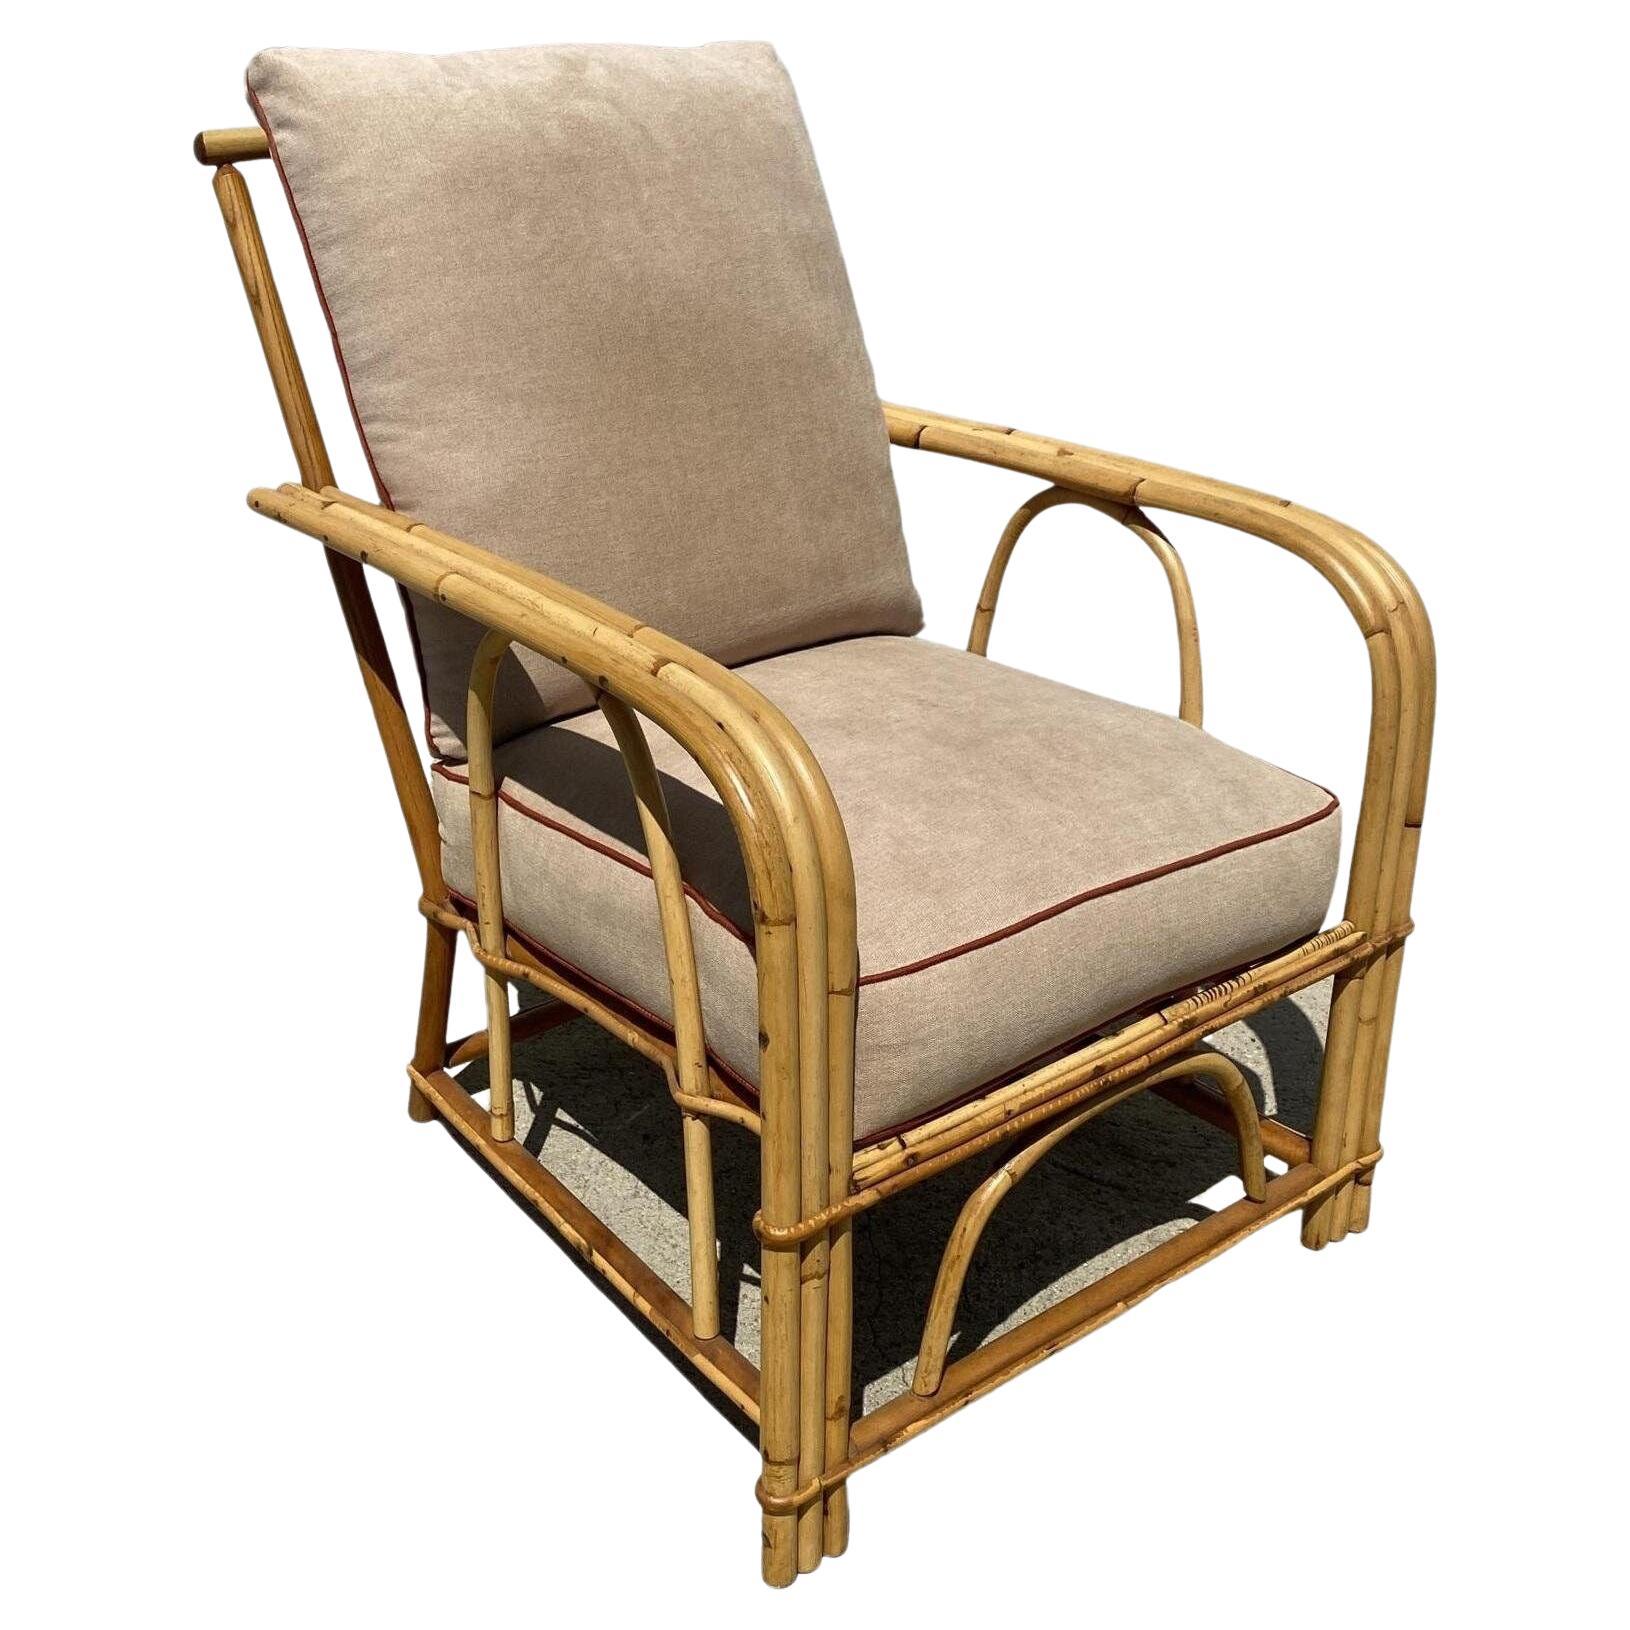 Restored "1949er" Rattan 3-Strand Lounge Chair by Heywood Wakefield For Sale